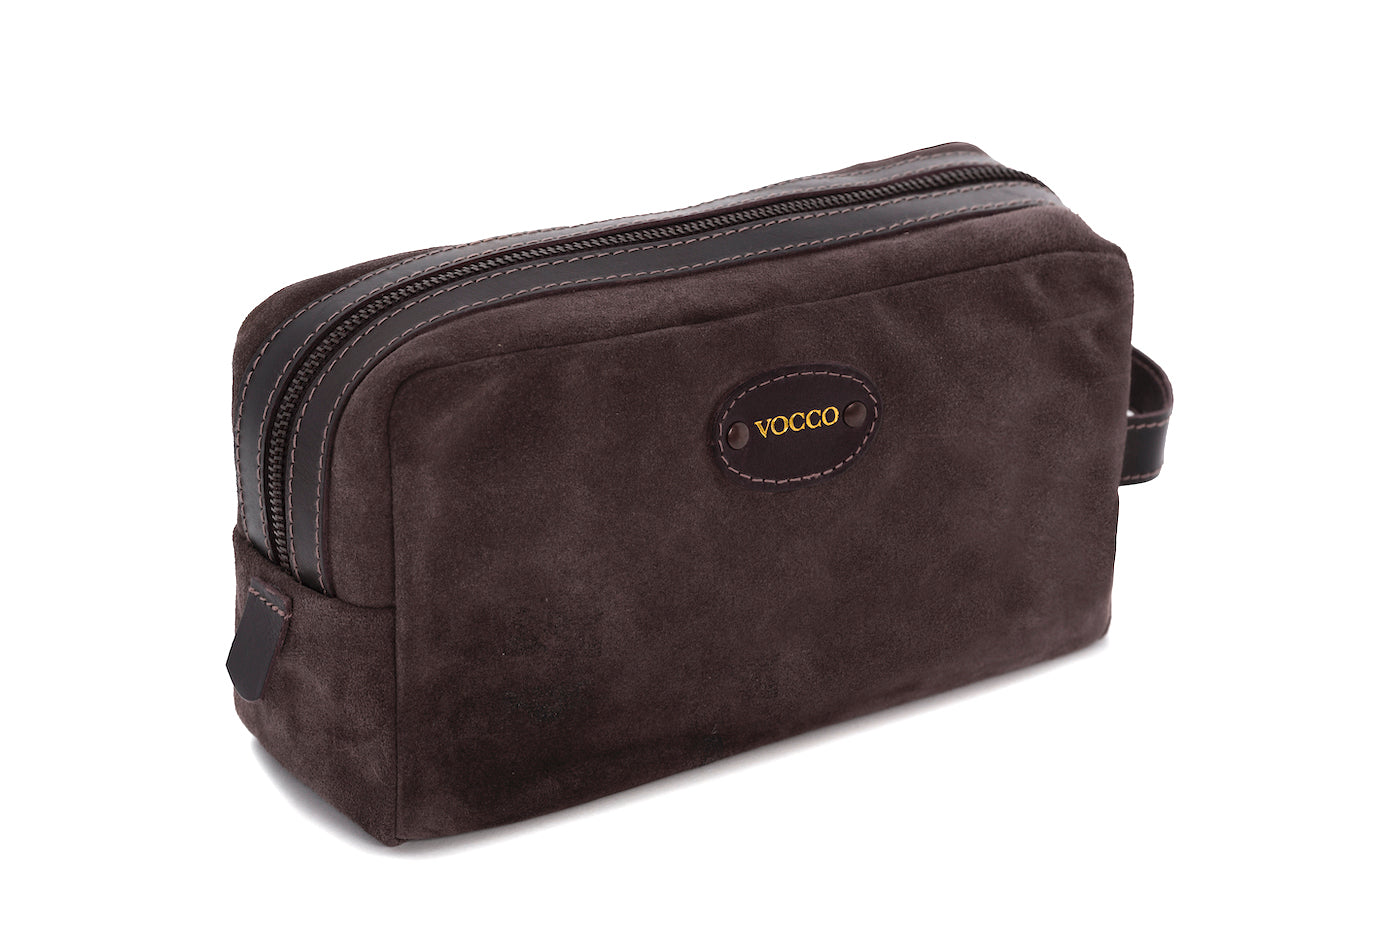 Vocco  Leather Taupe Toiletry Case - Vocco